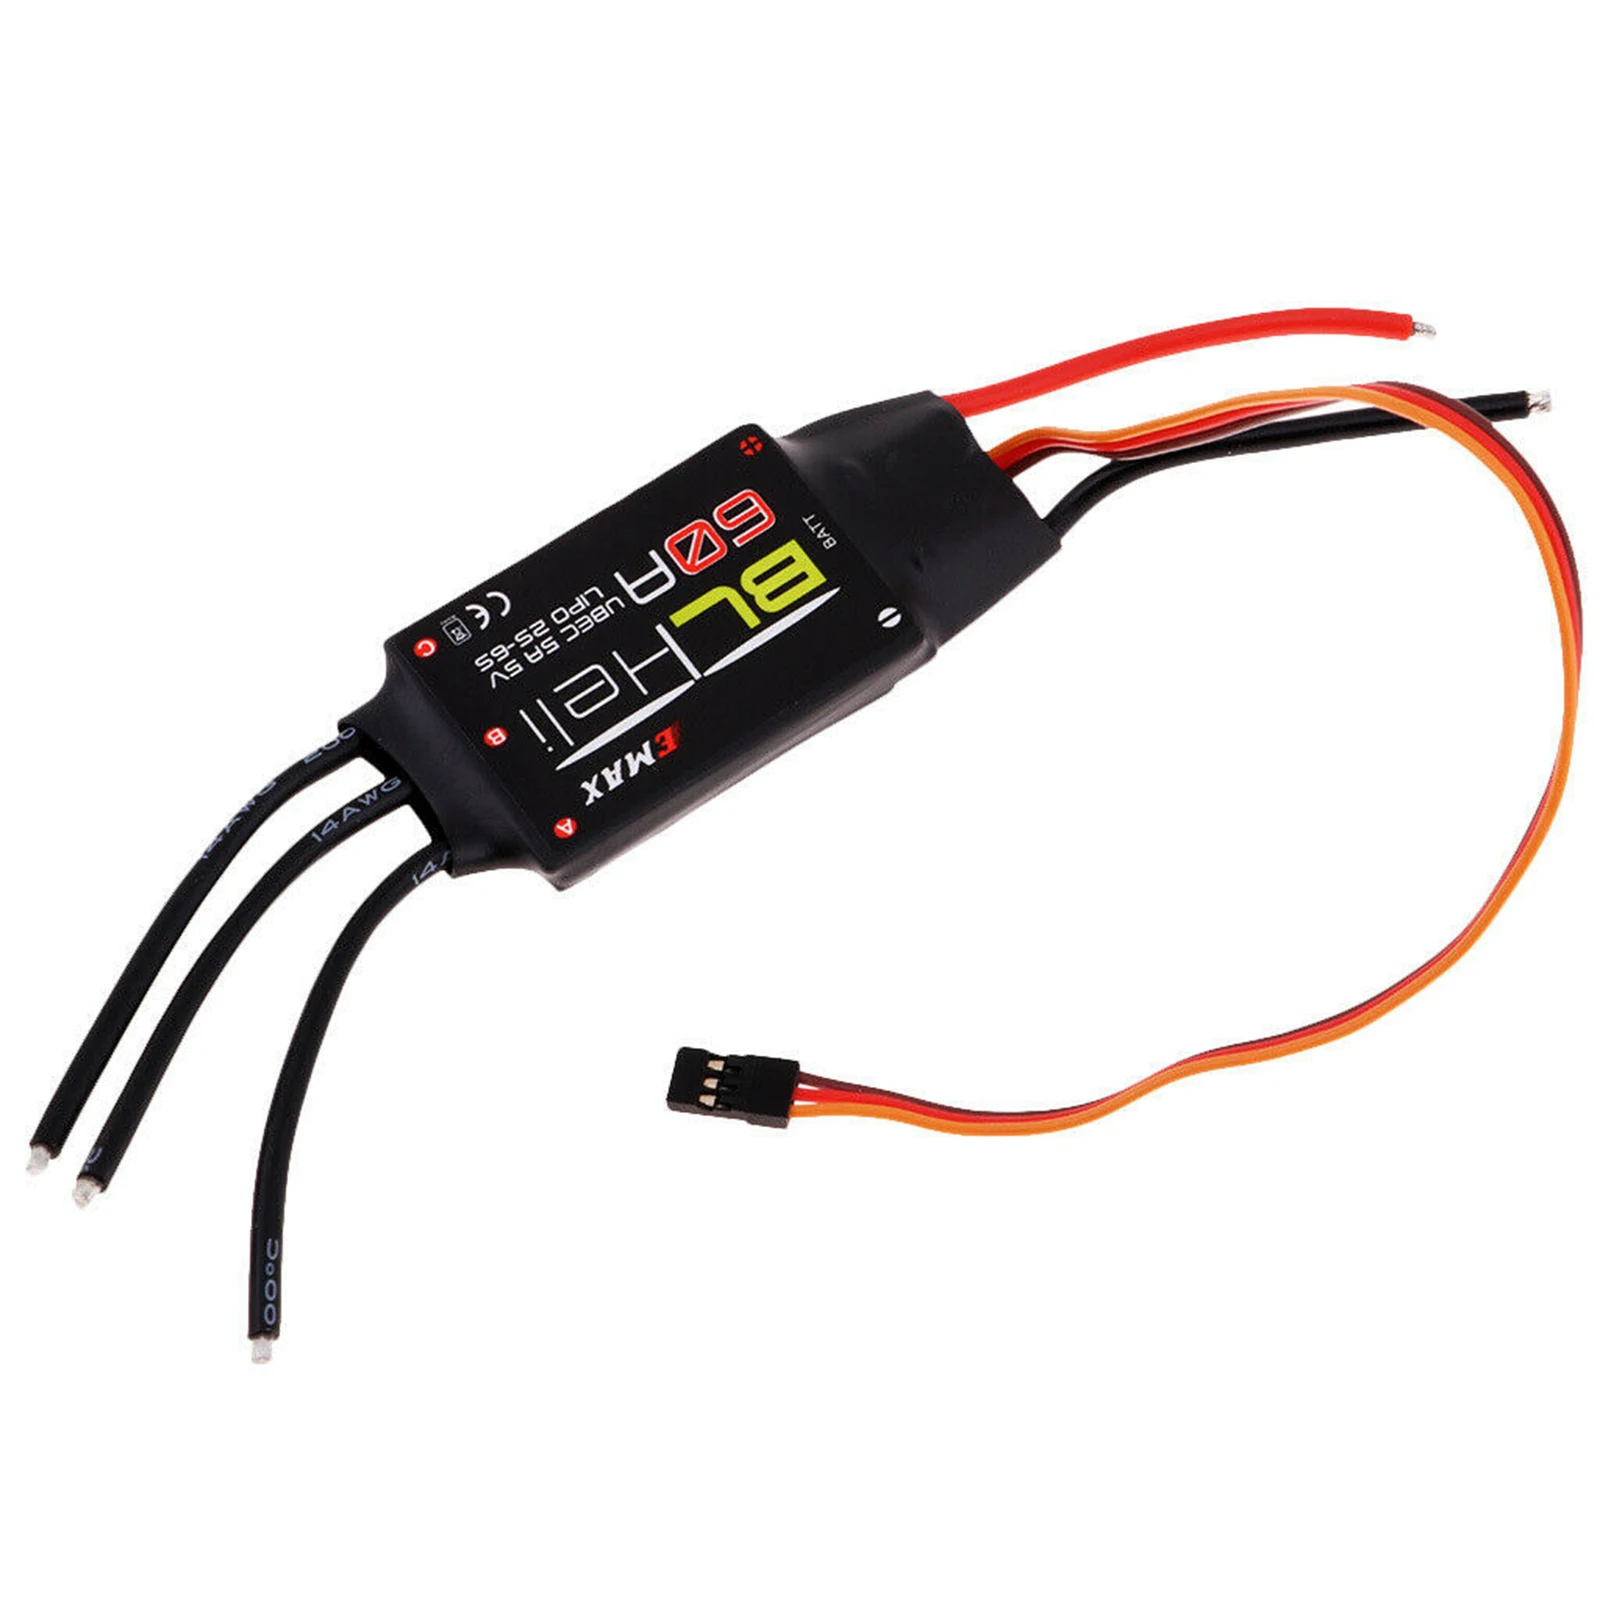 

1 PCS 40A 60A 2S-6S ESC Speed Controller With UBEC For RC QAV250 Drone Accessories Airplanes Helicopter Compatible BLHeli